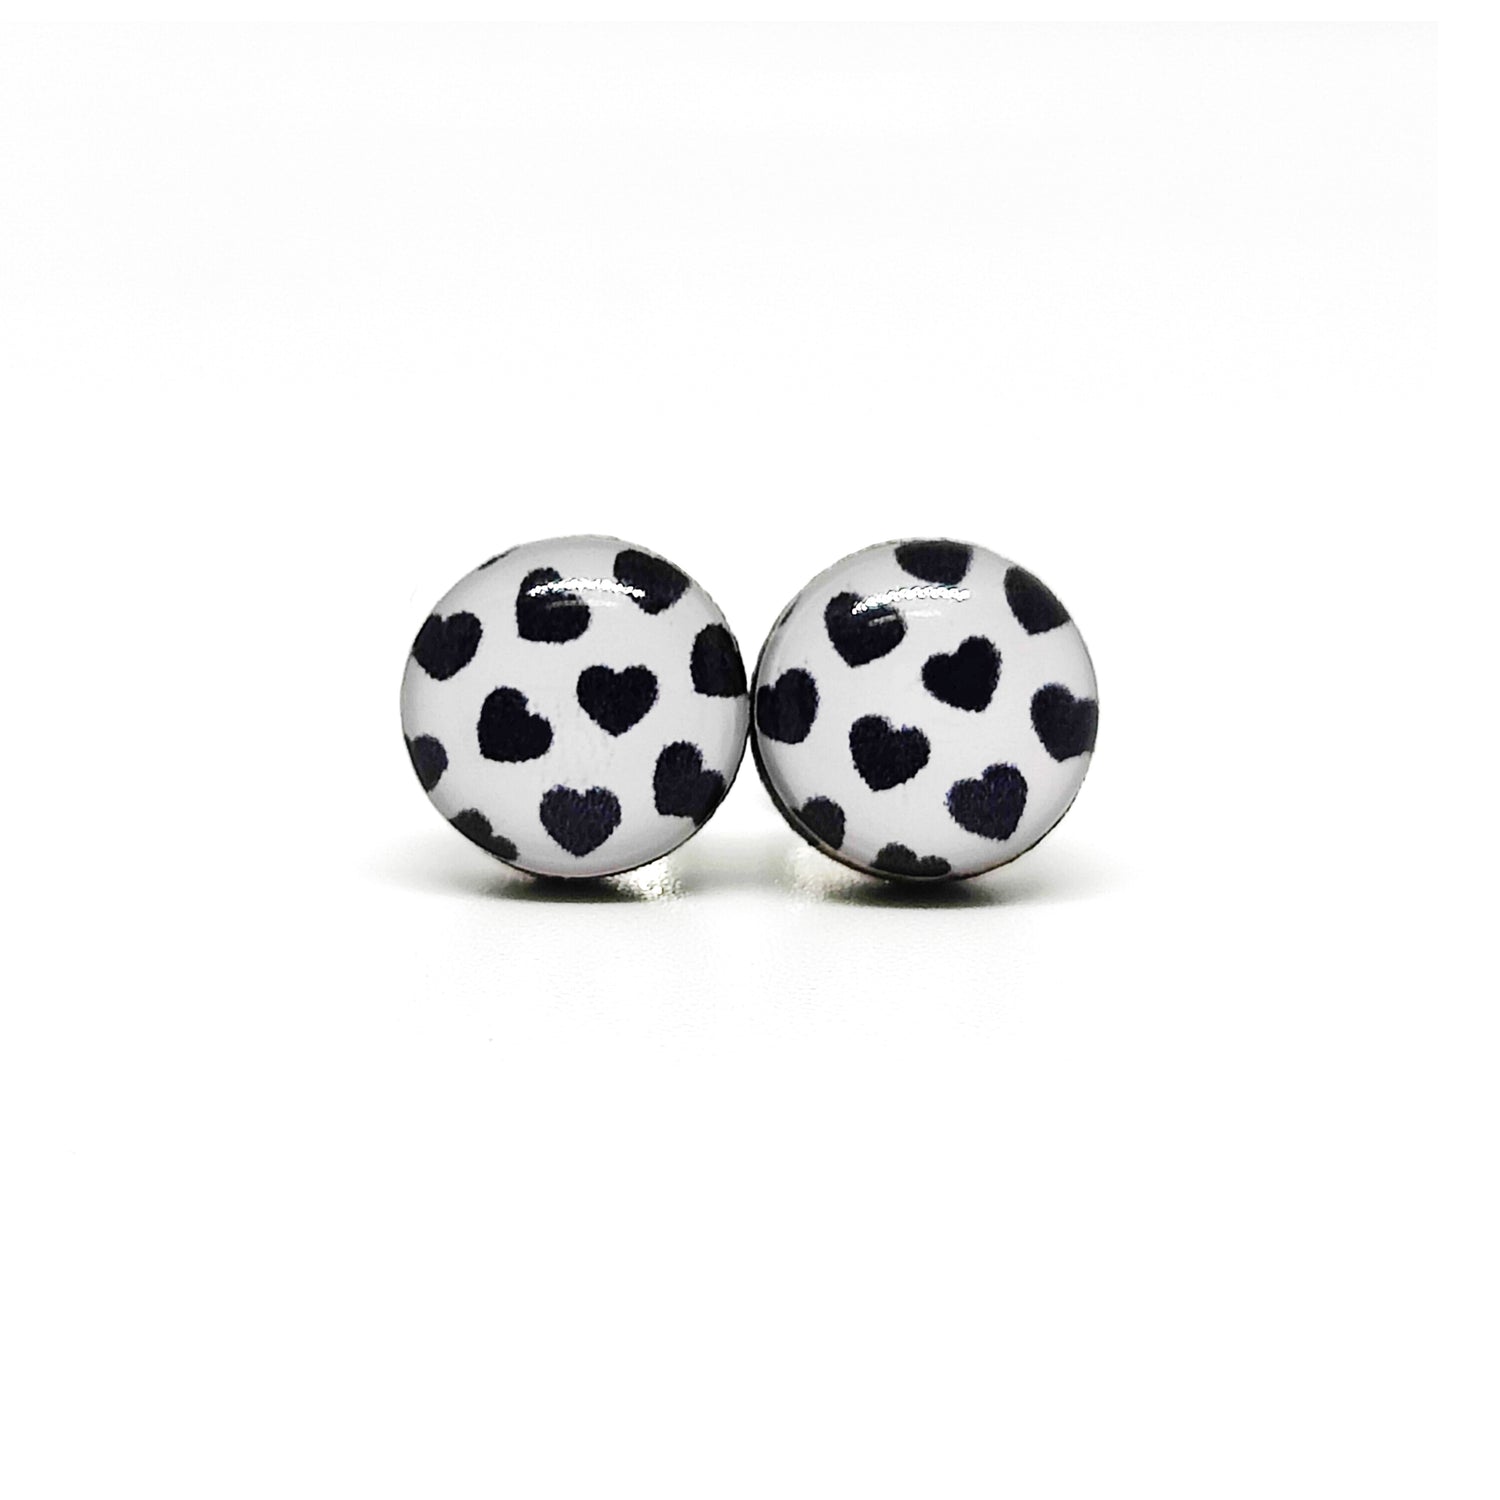 black and white heart stud earrings by candi cove designs everyday simple stud earrings for sensitive ears